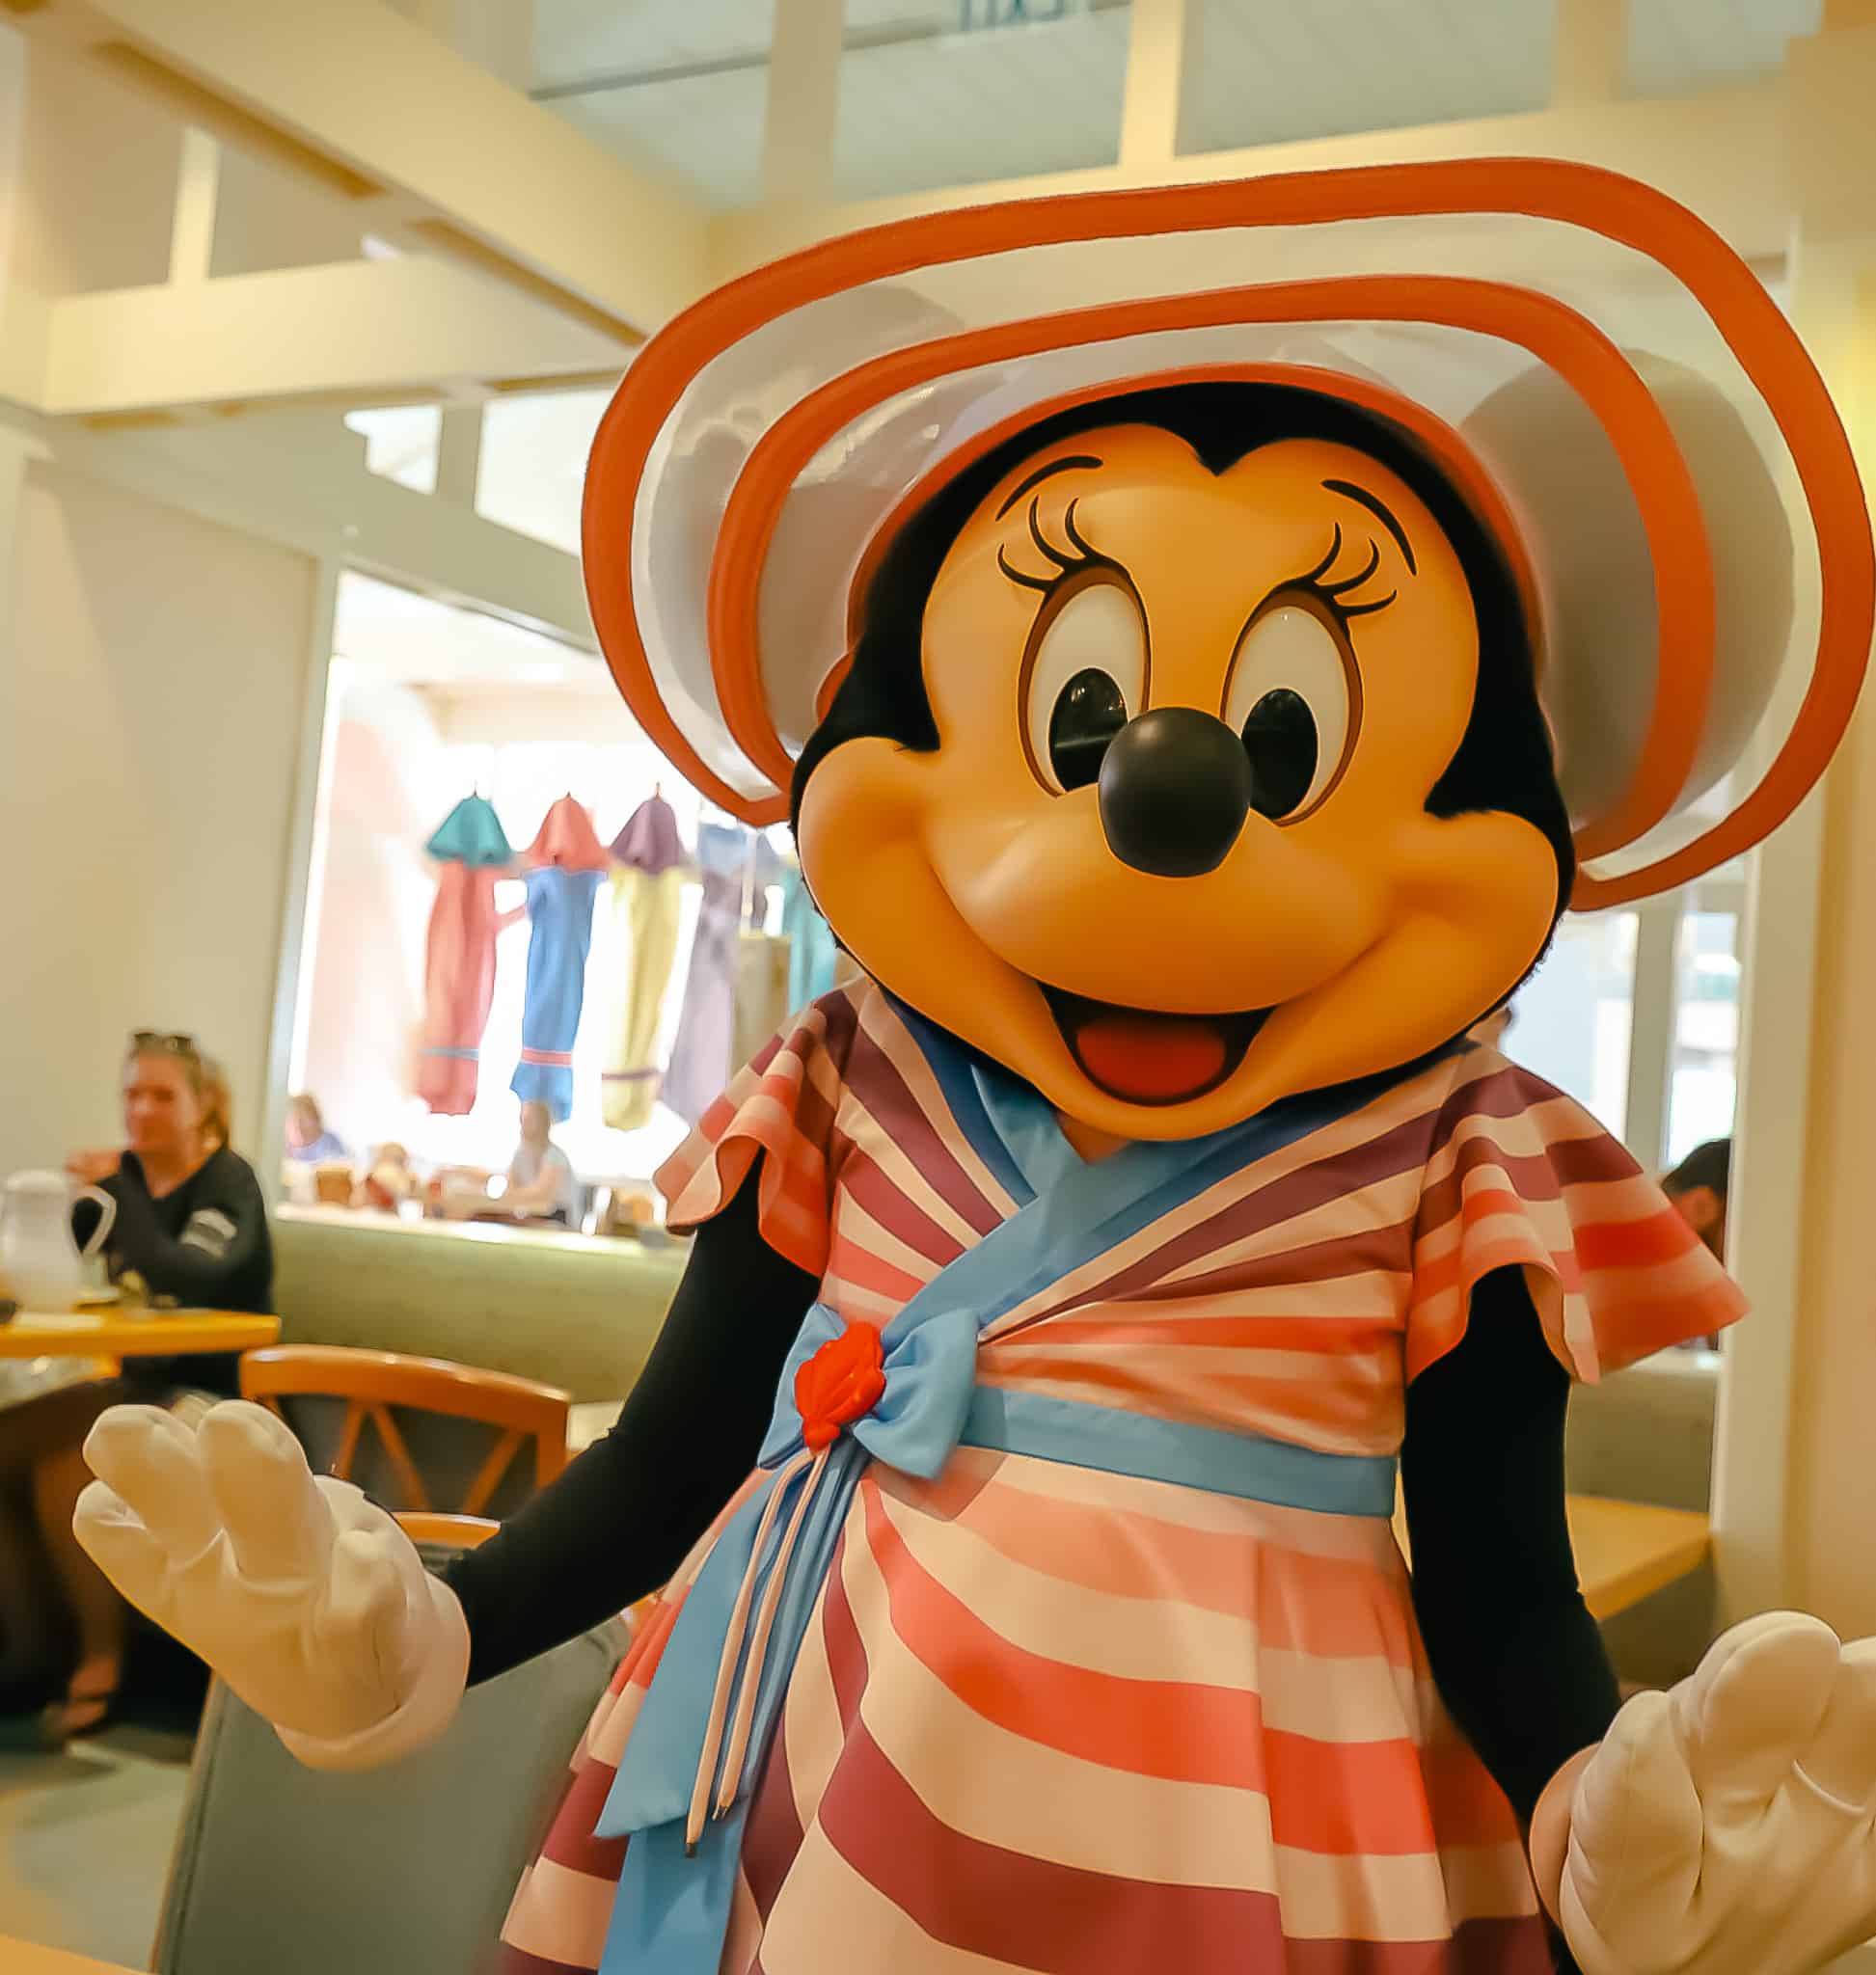 Minnie Mouse wearing her Beach Bash attire.